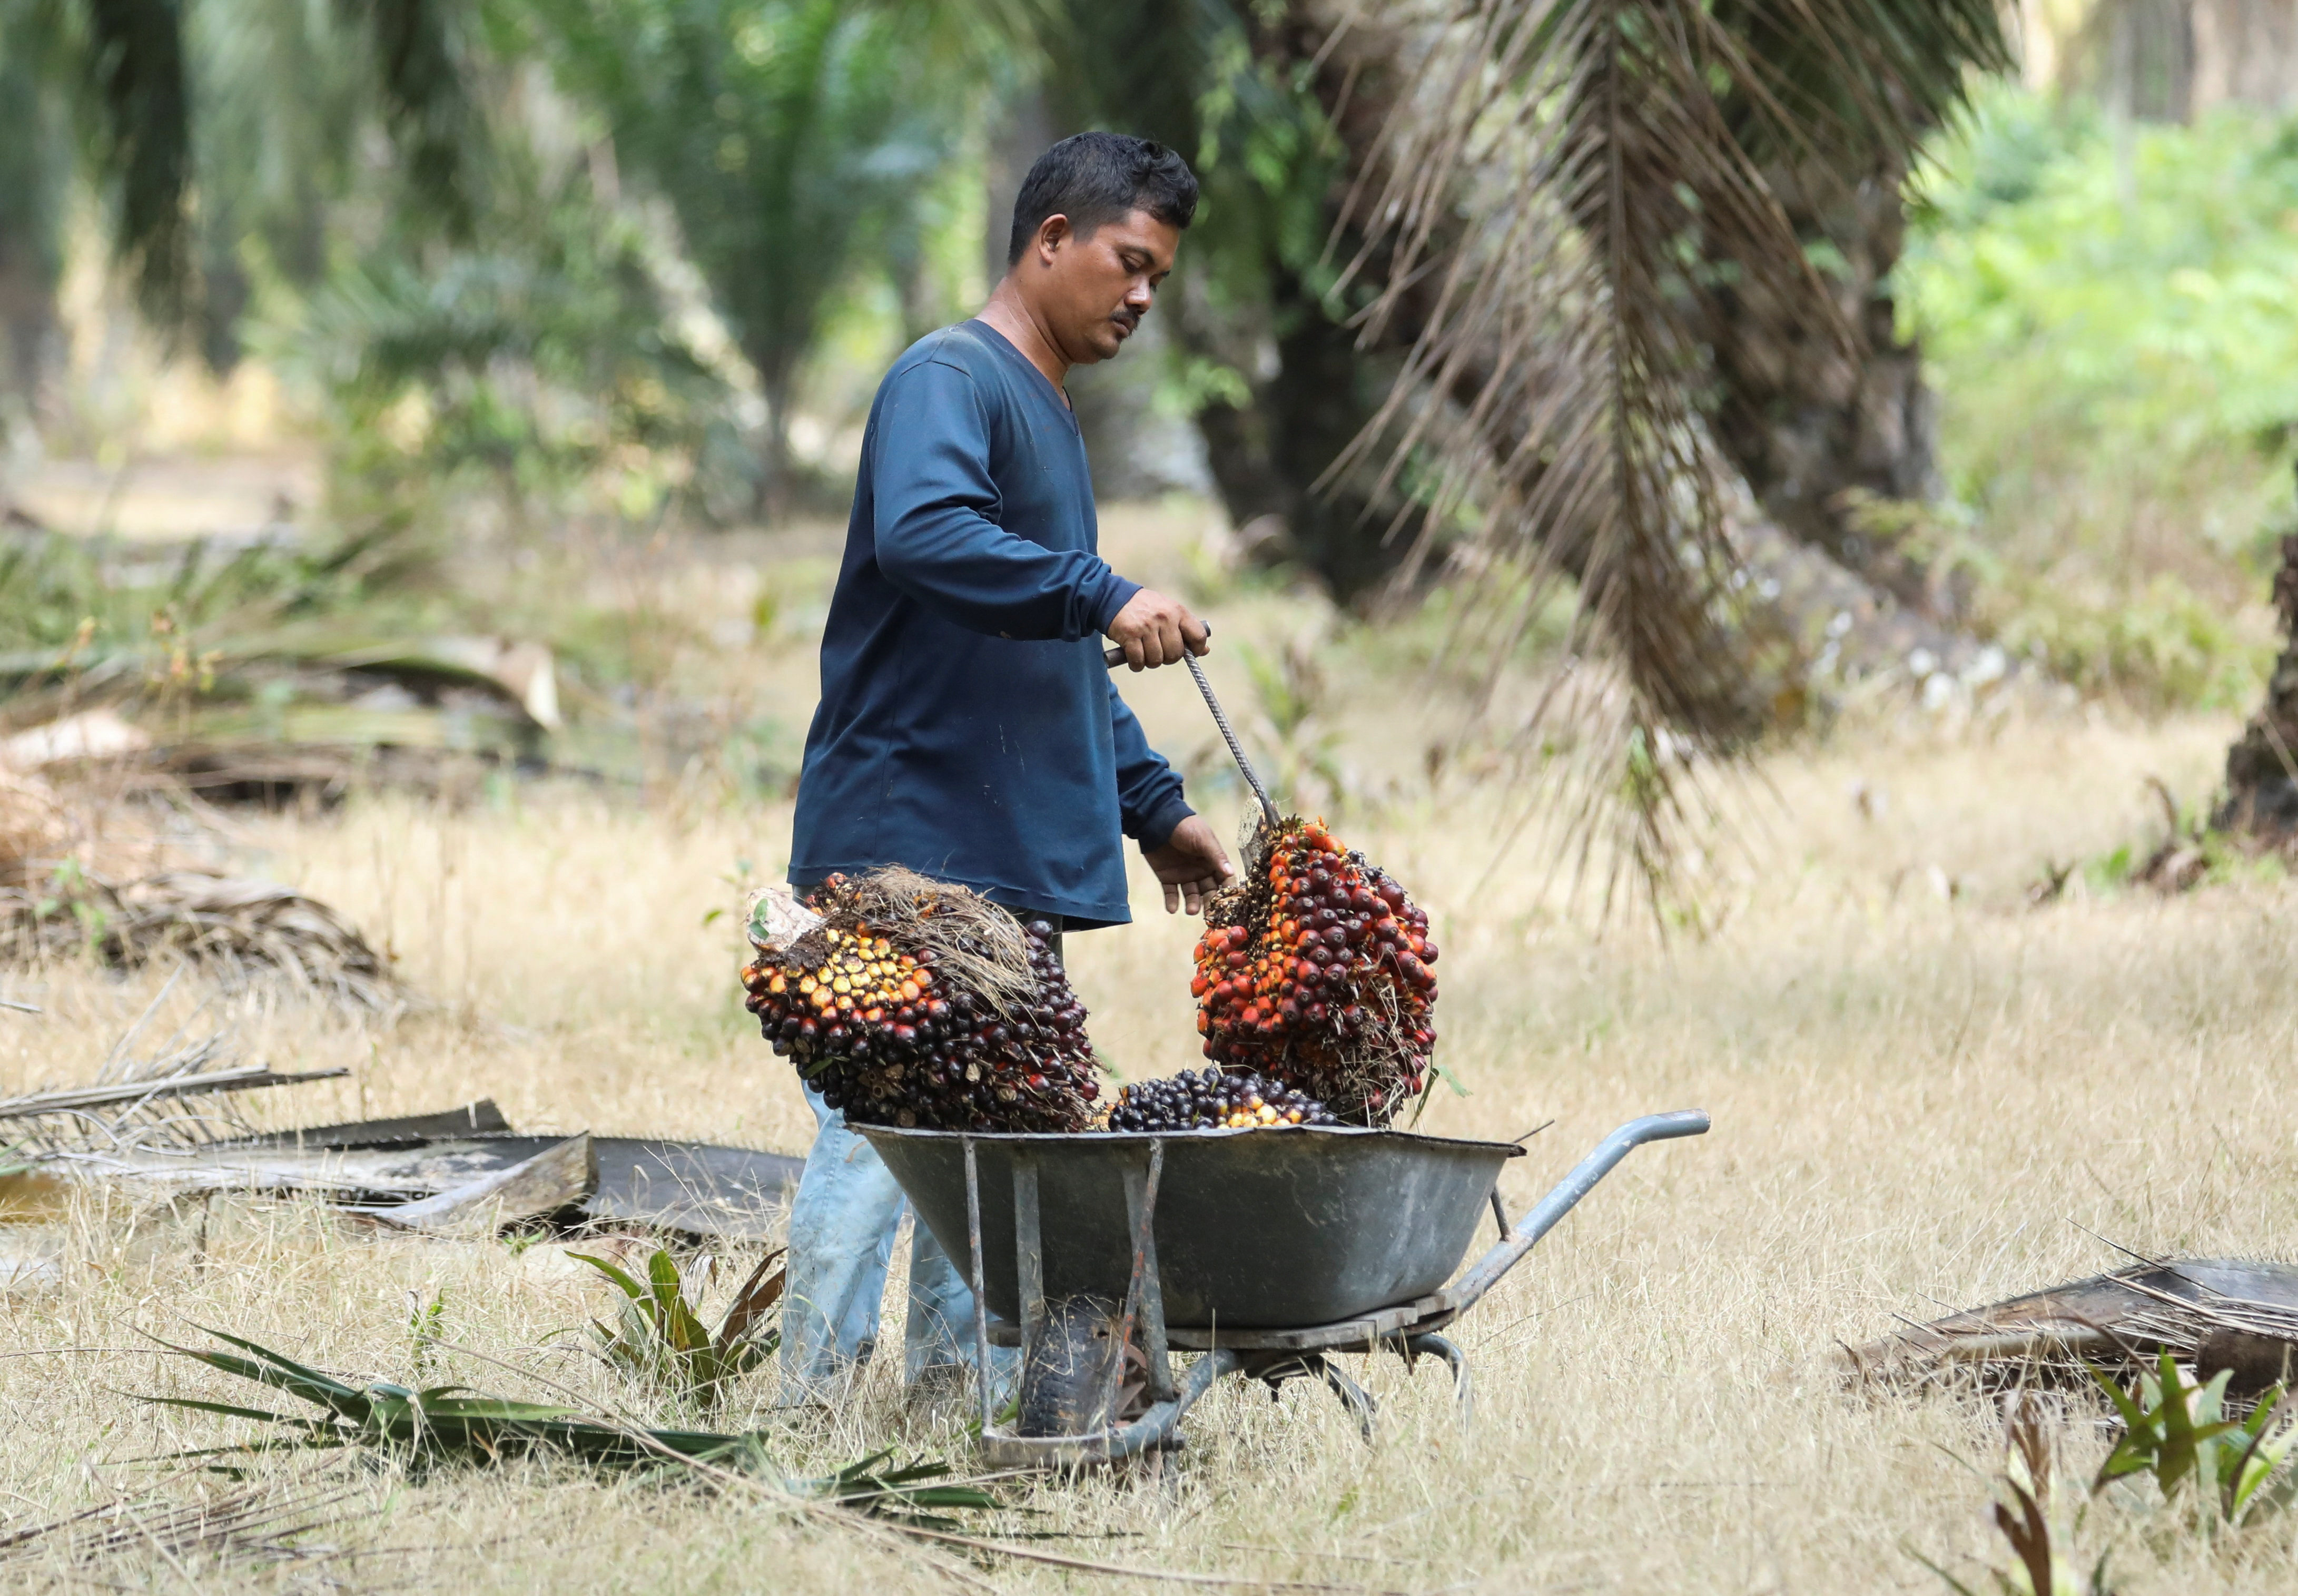 A worker places fresh fruit bunches of oil palm tree into a wheelbarrow during harvest at a palm oil plantation in Kuala Selangor